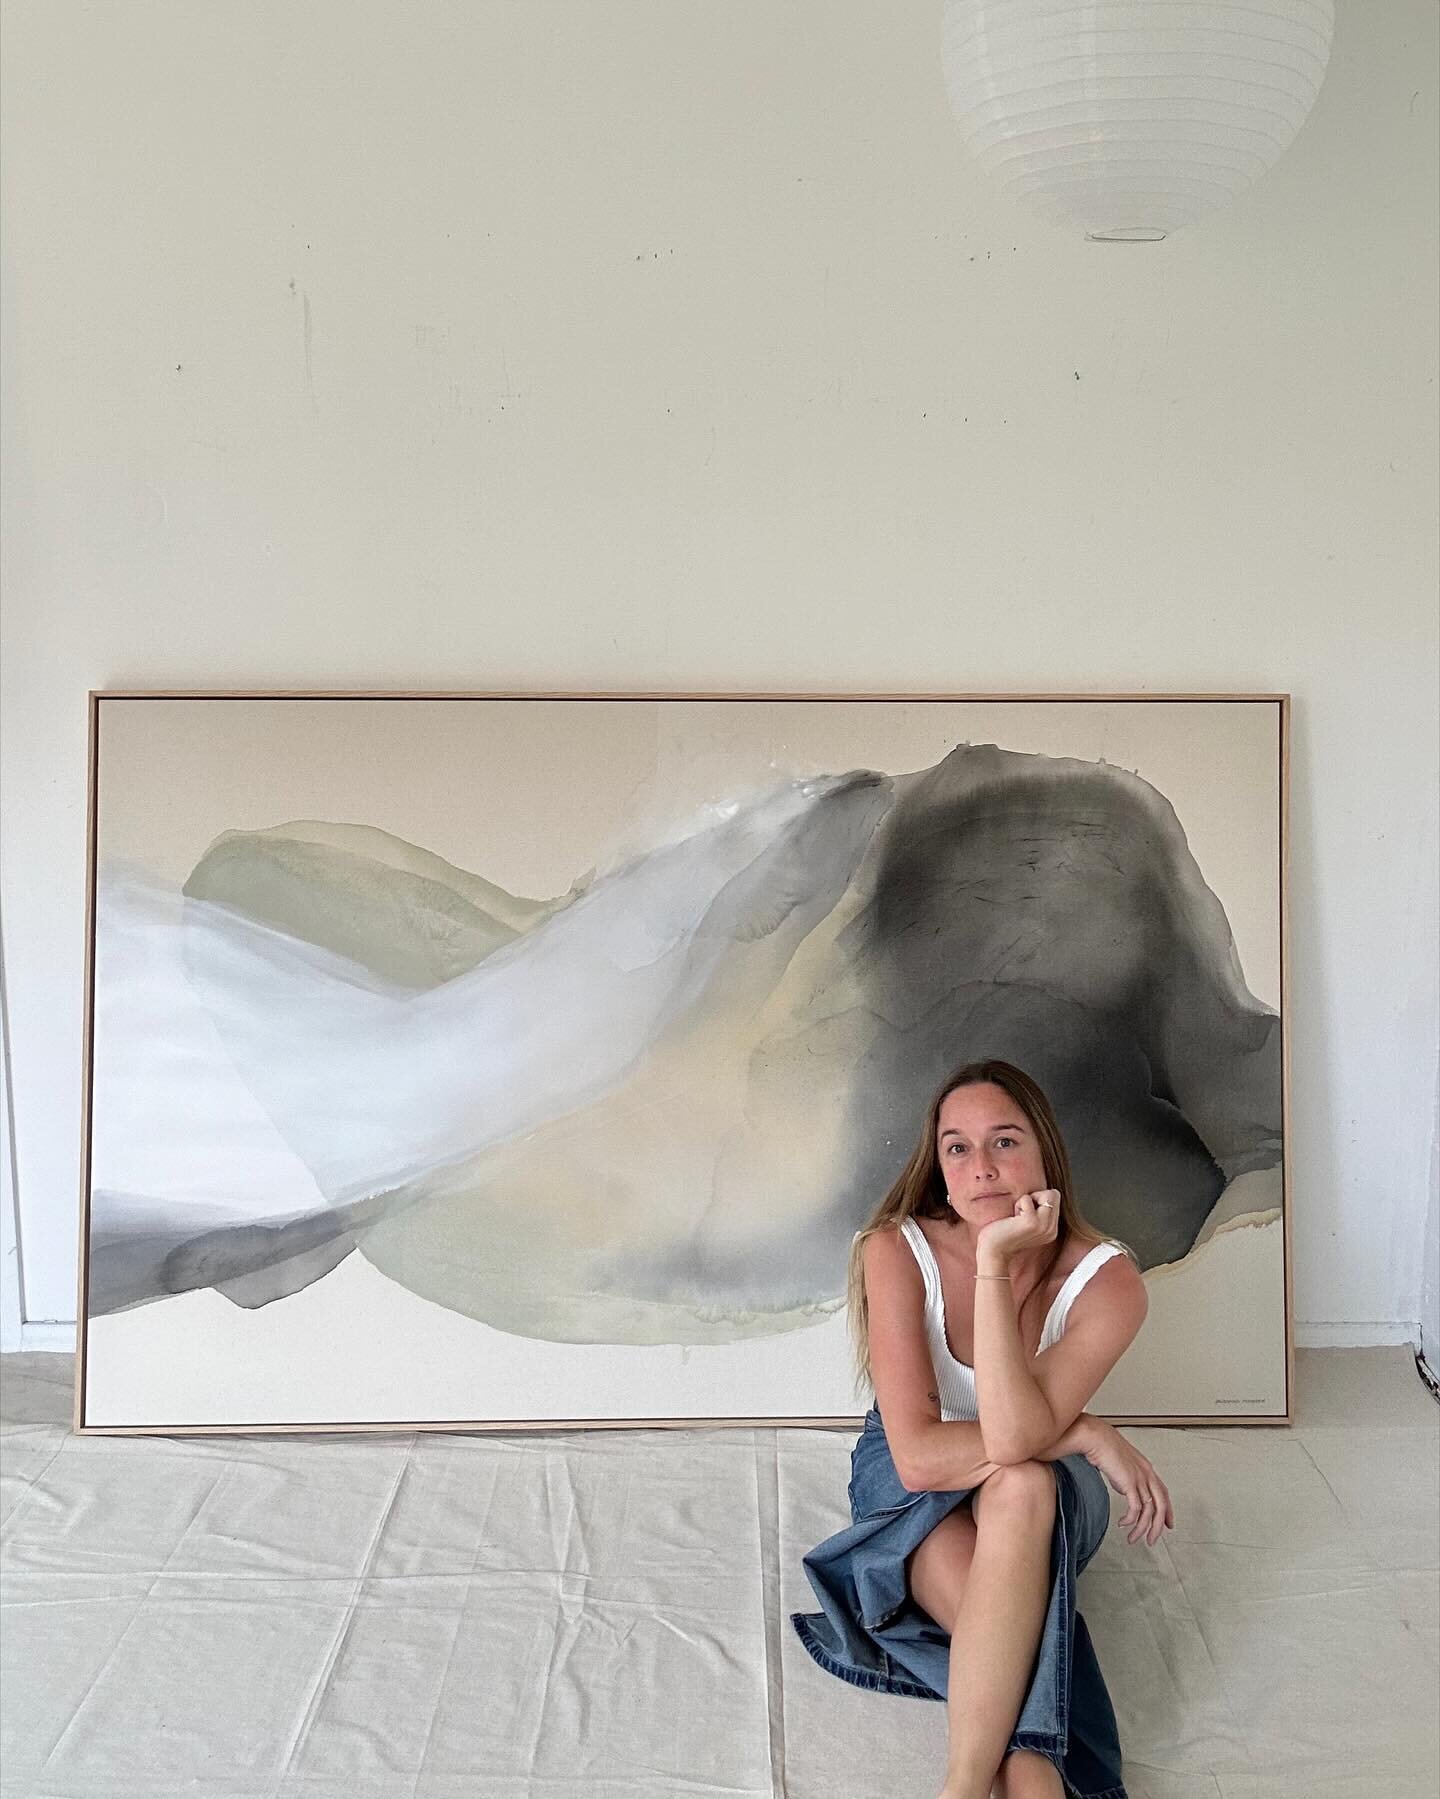 This large 160x200cm commission was just sent off to Canberra yesterday. Thank you so much to the collector for trusting me to create the center piece of your home.